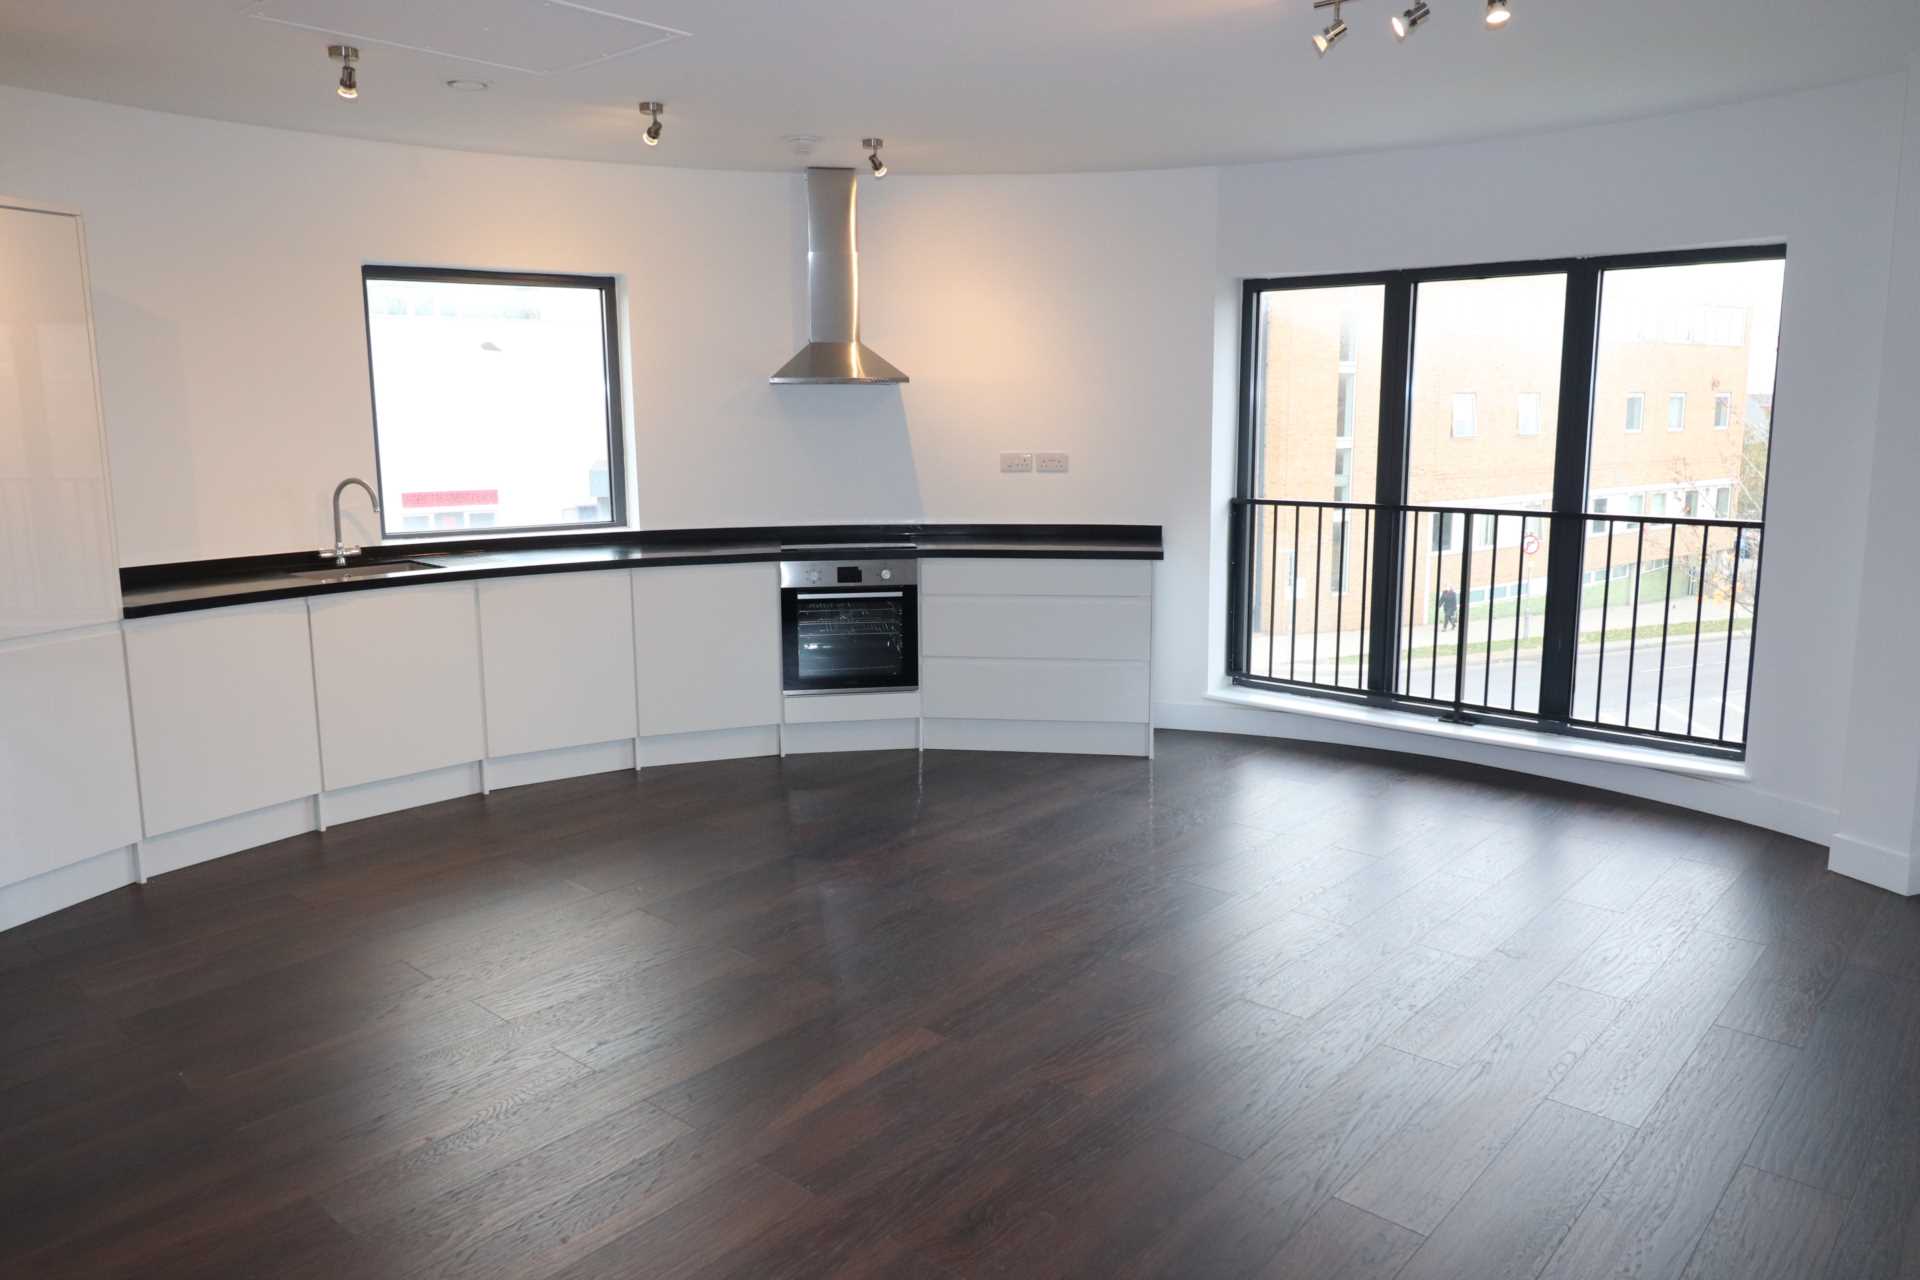 Property King Estate Agents - 2 Bedroom Apartment, New Road, Gravesend